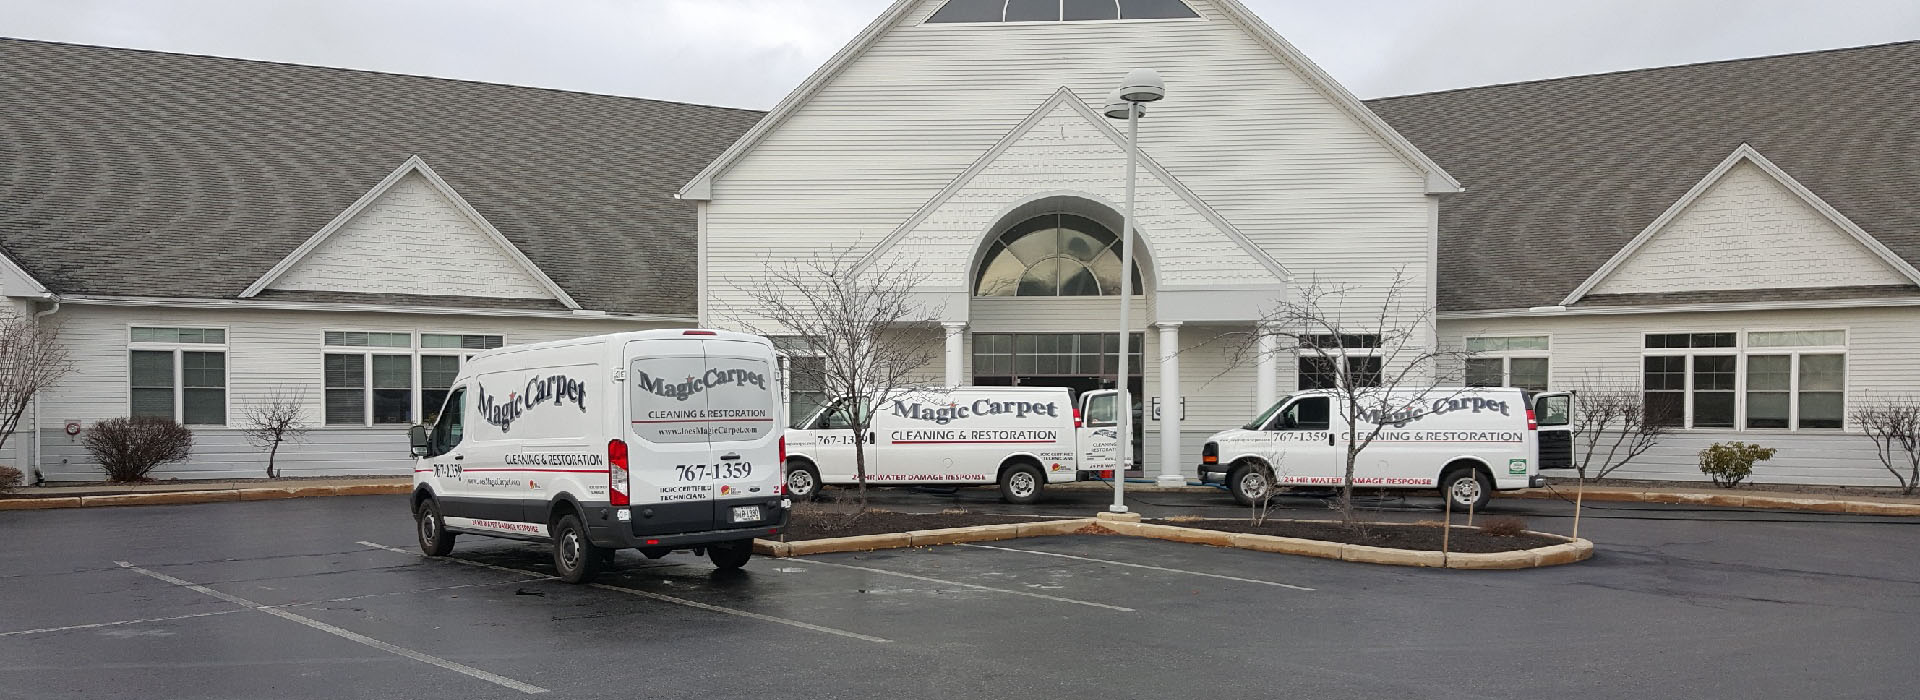 Magic Carpet Cleaning Restoration South Portland Cape Elizabeth Maine Mold Remediation Removal Upholstery